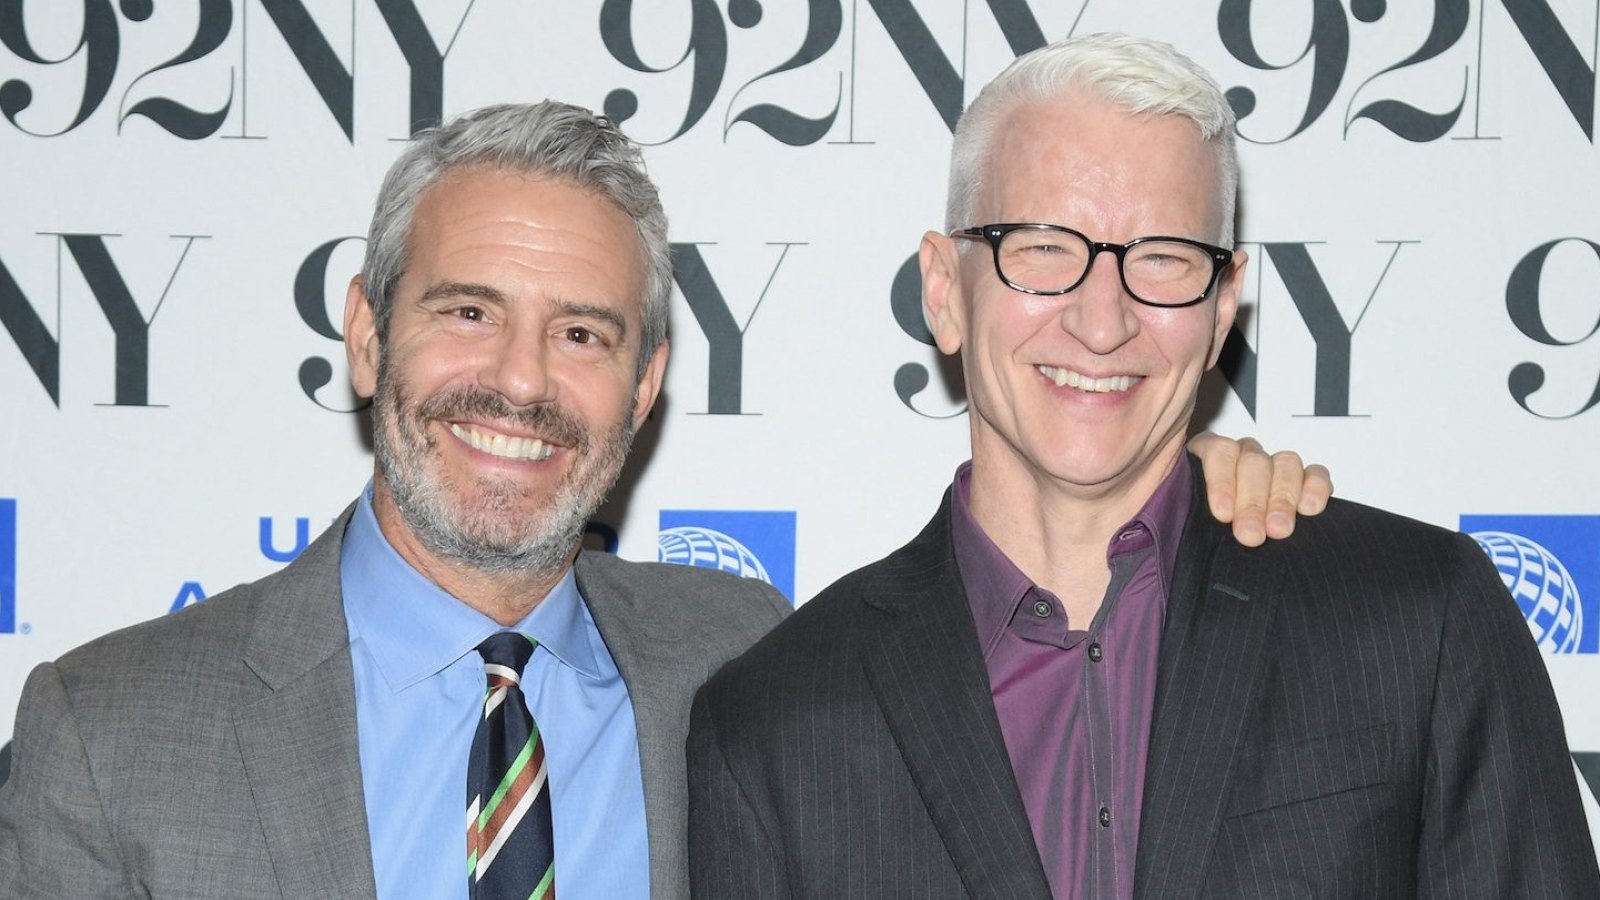 Anderson Cooper Does a Spit Take After Andy Cohen Alleges That the CNN Host Is Open to a Threesome